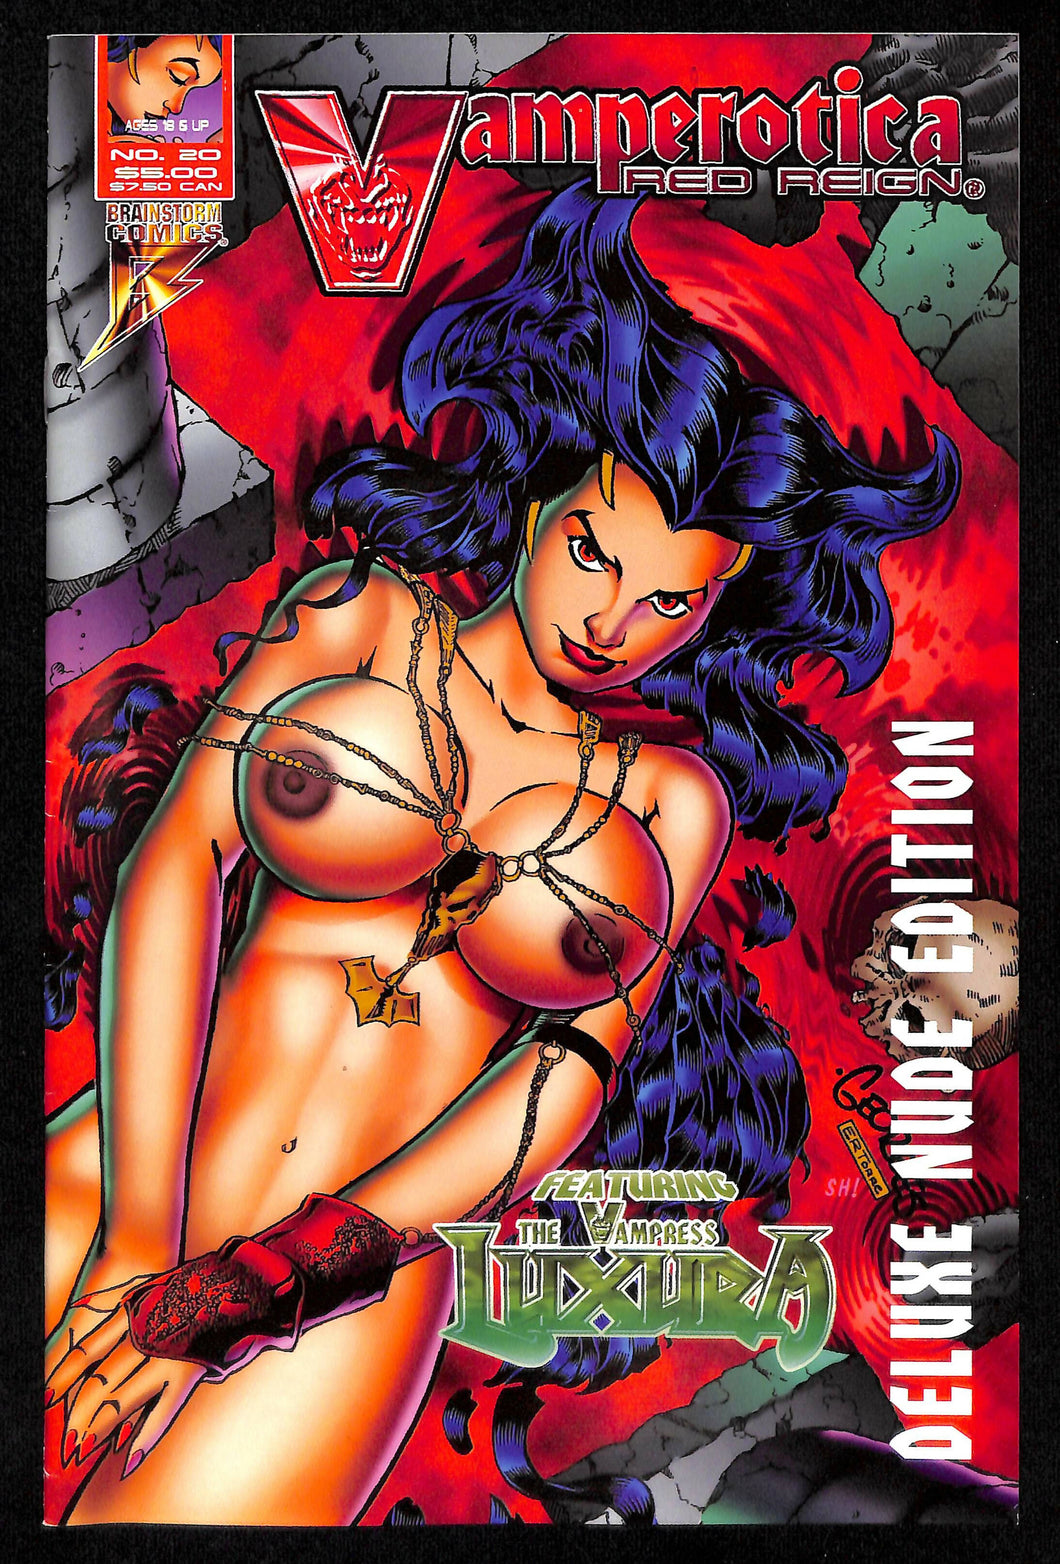 Vamperotica Red Reign #20 - nude edition comic [Brainstorm Comics 1996] excellent condition